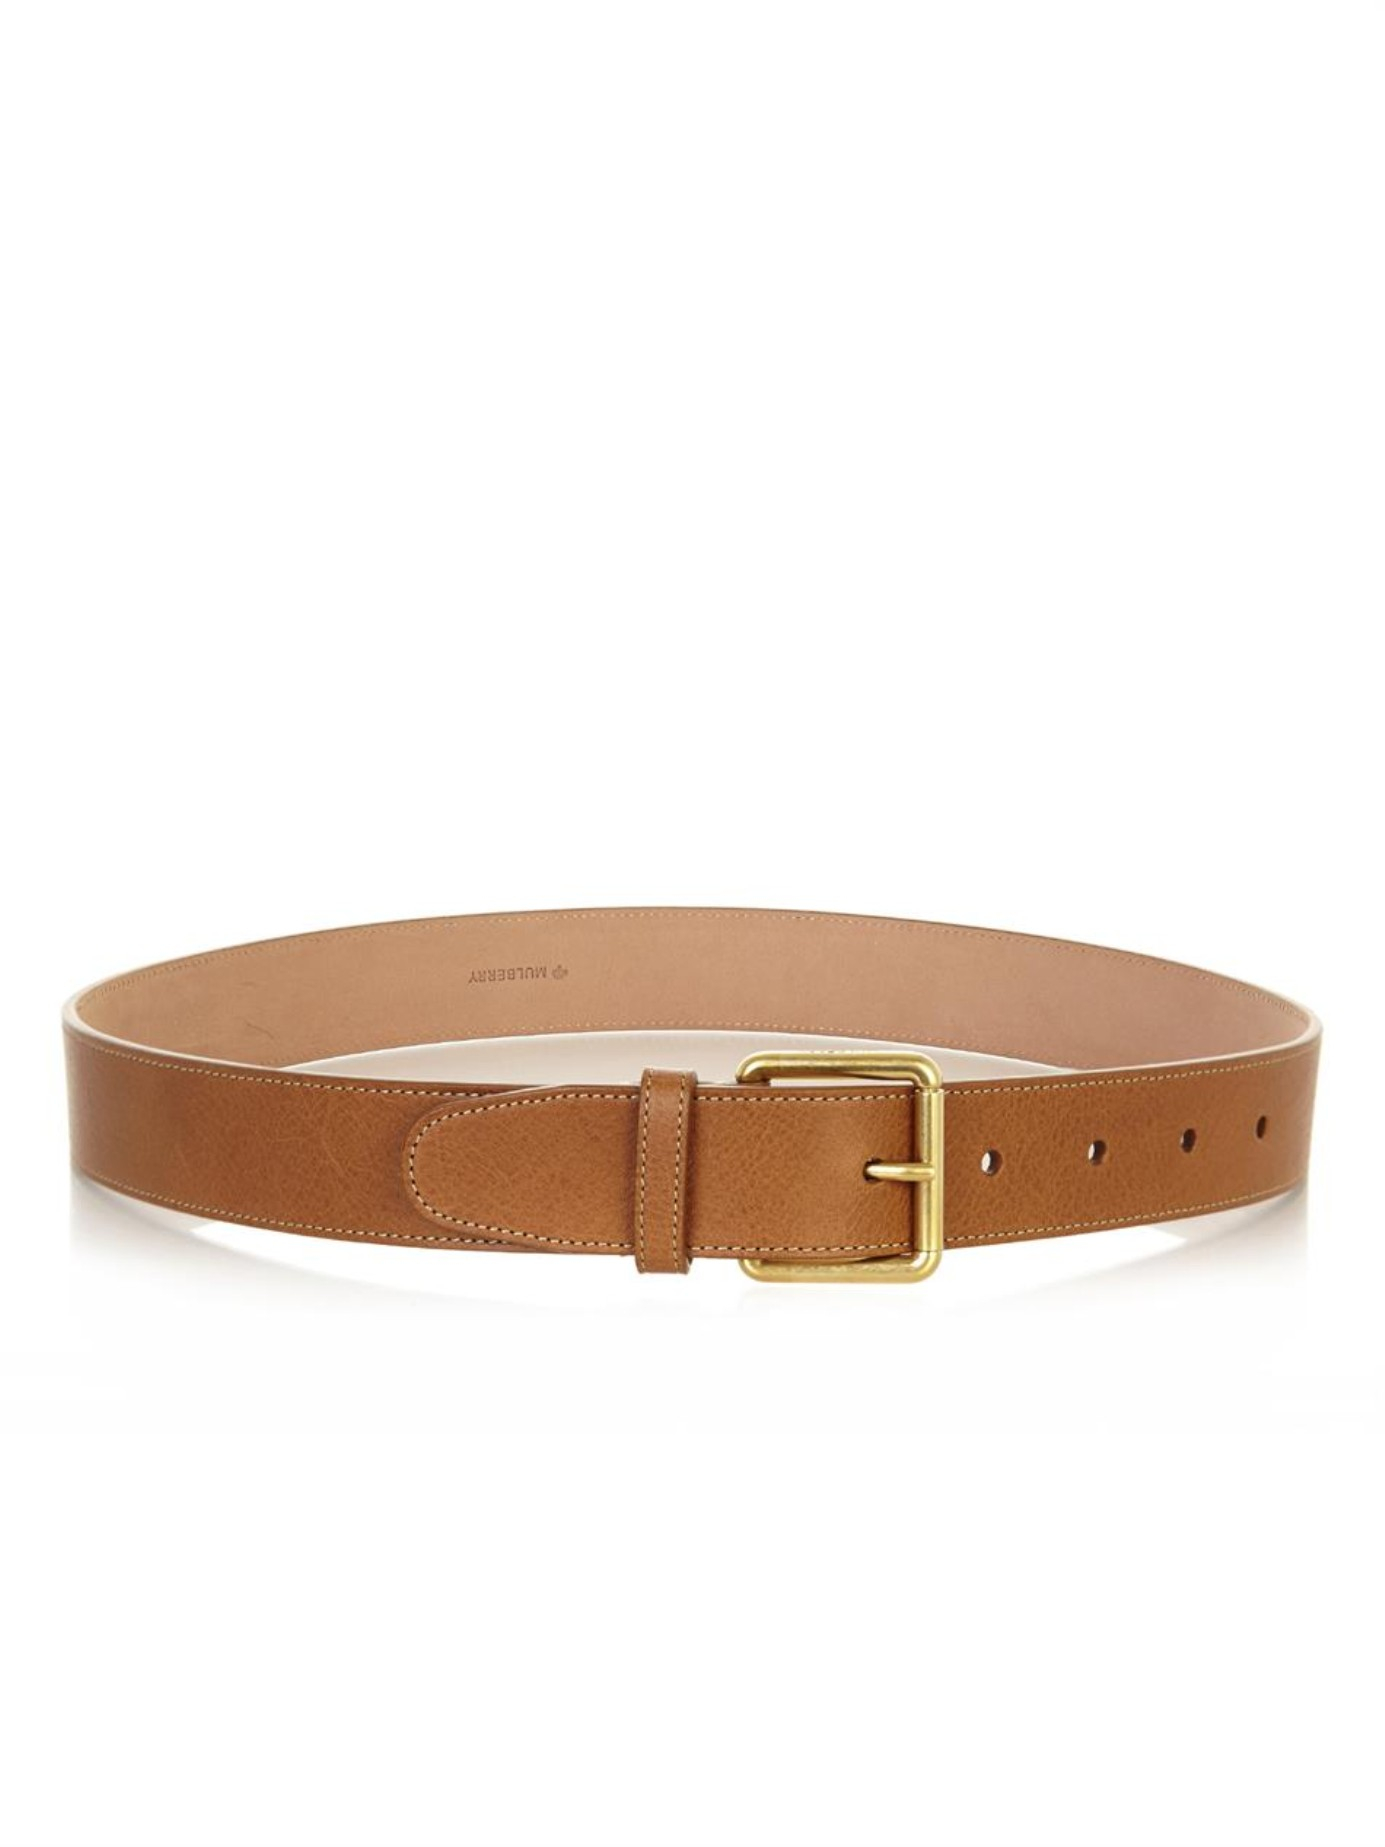 Mulberry Wide Leather Belt in Brown for Men | Lyst